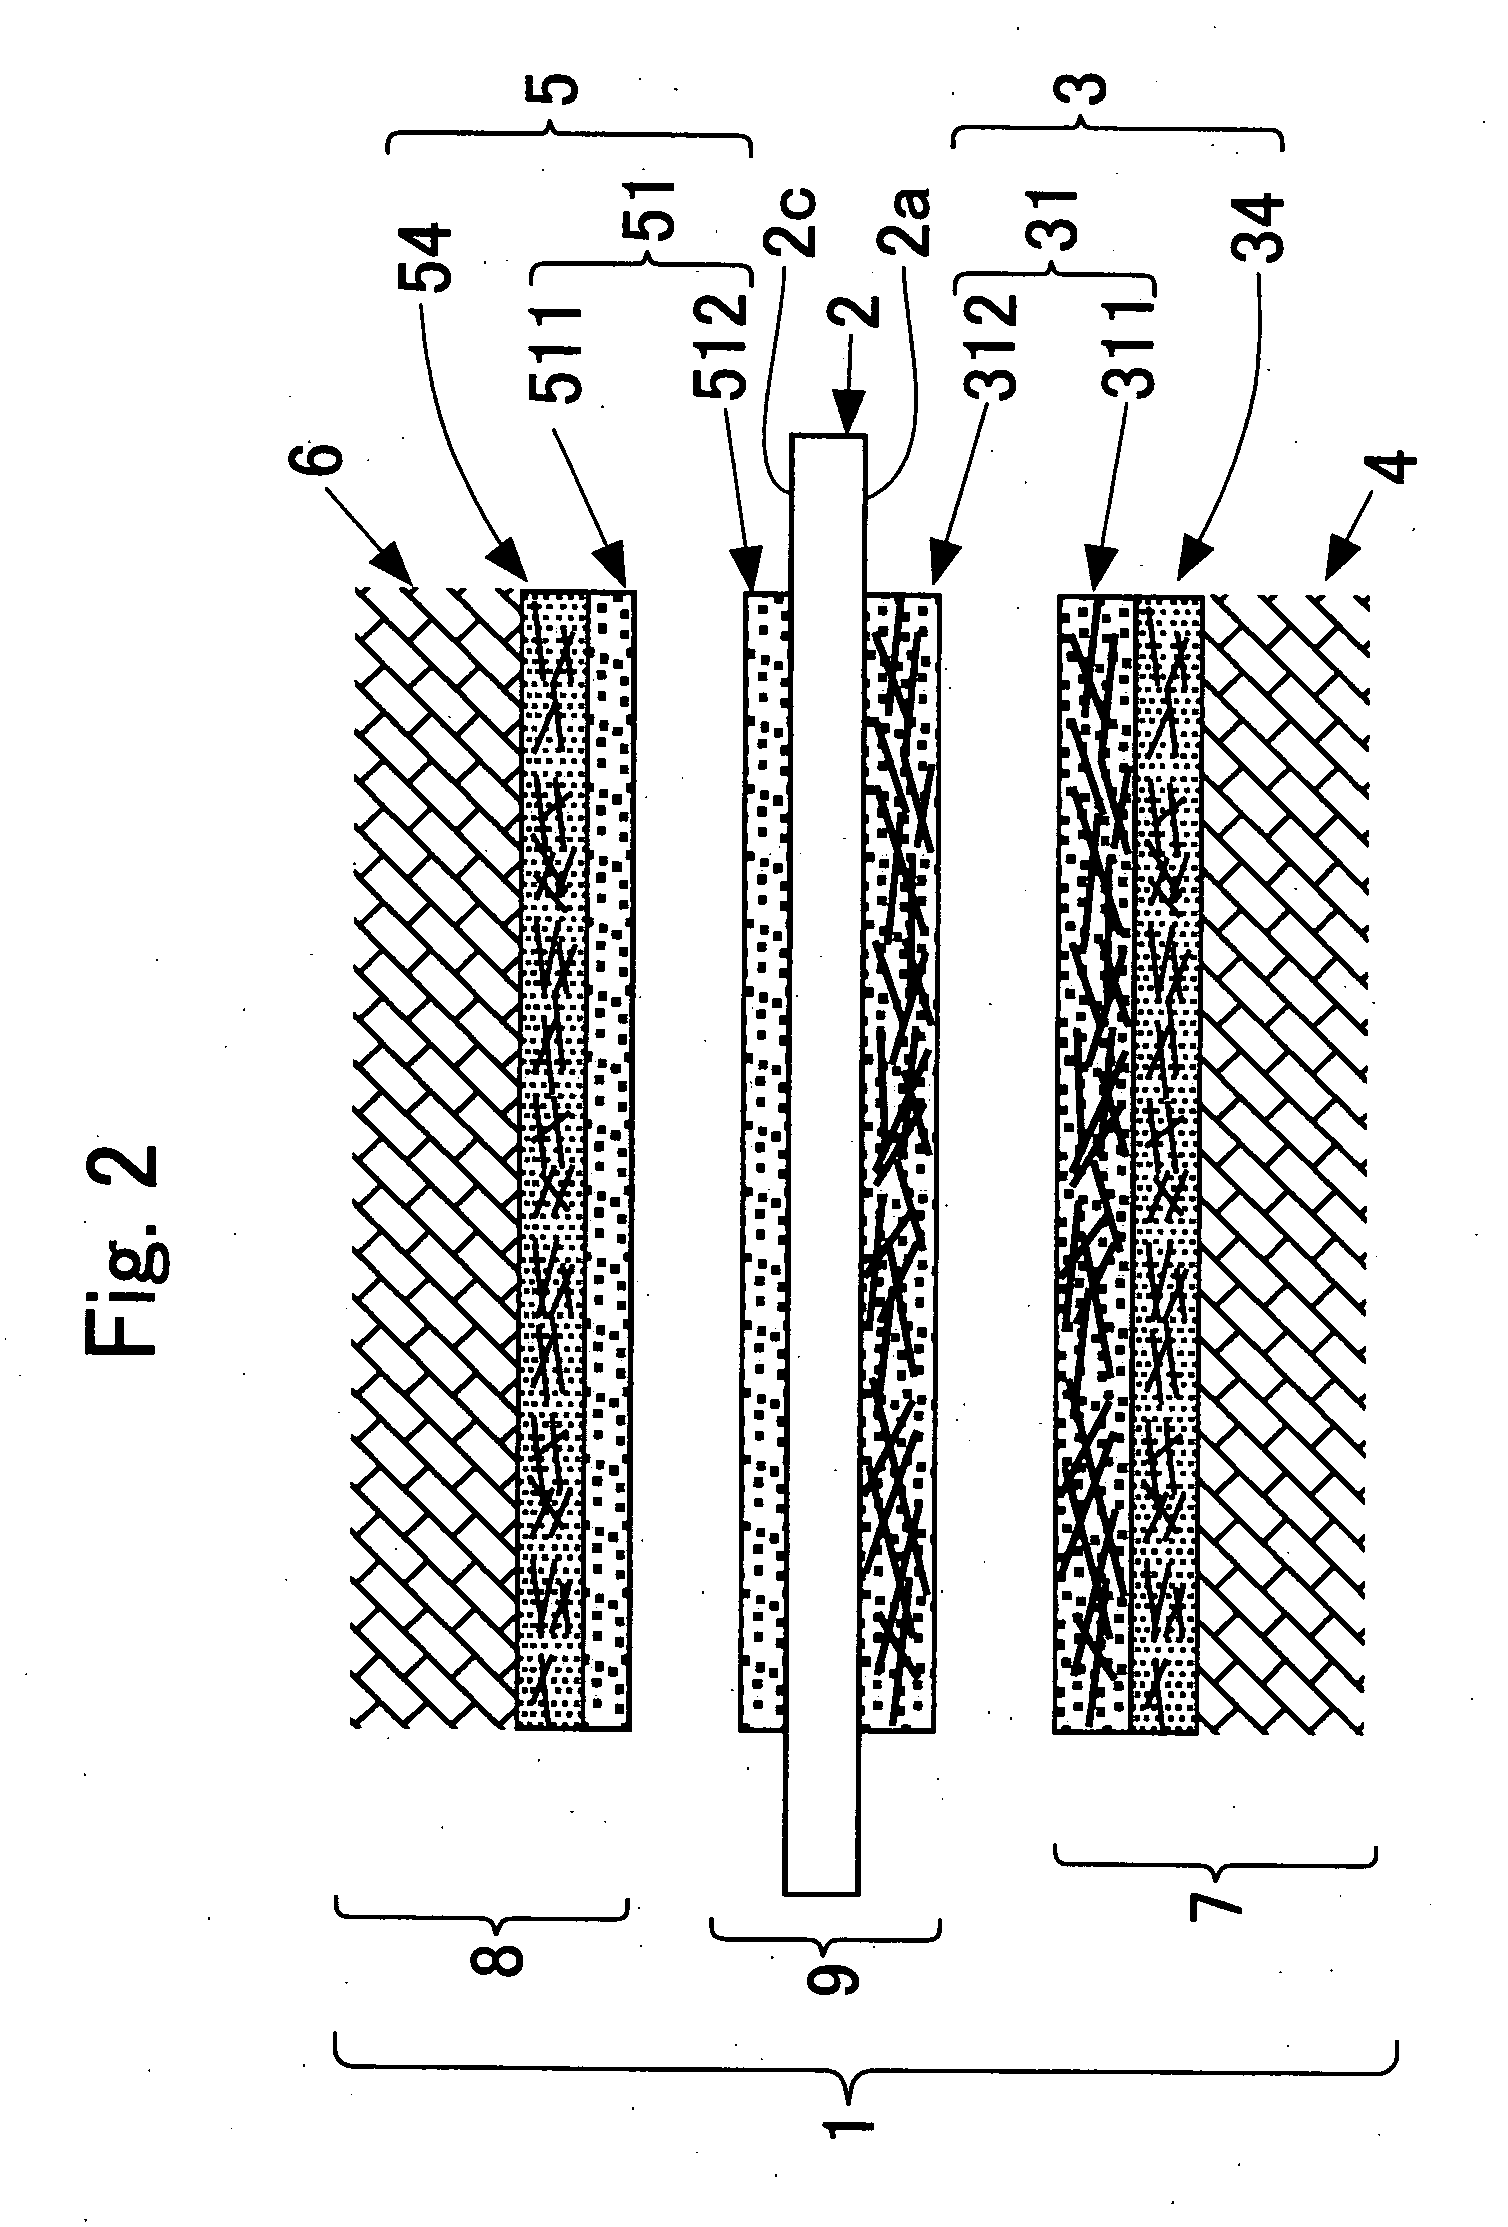 Membrane electrode assembly for fuel cell and process for manufacturing the same